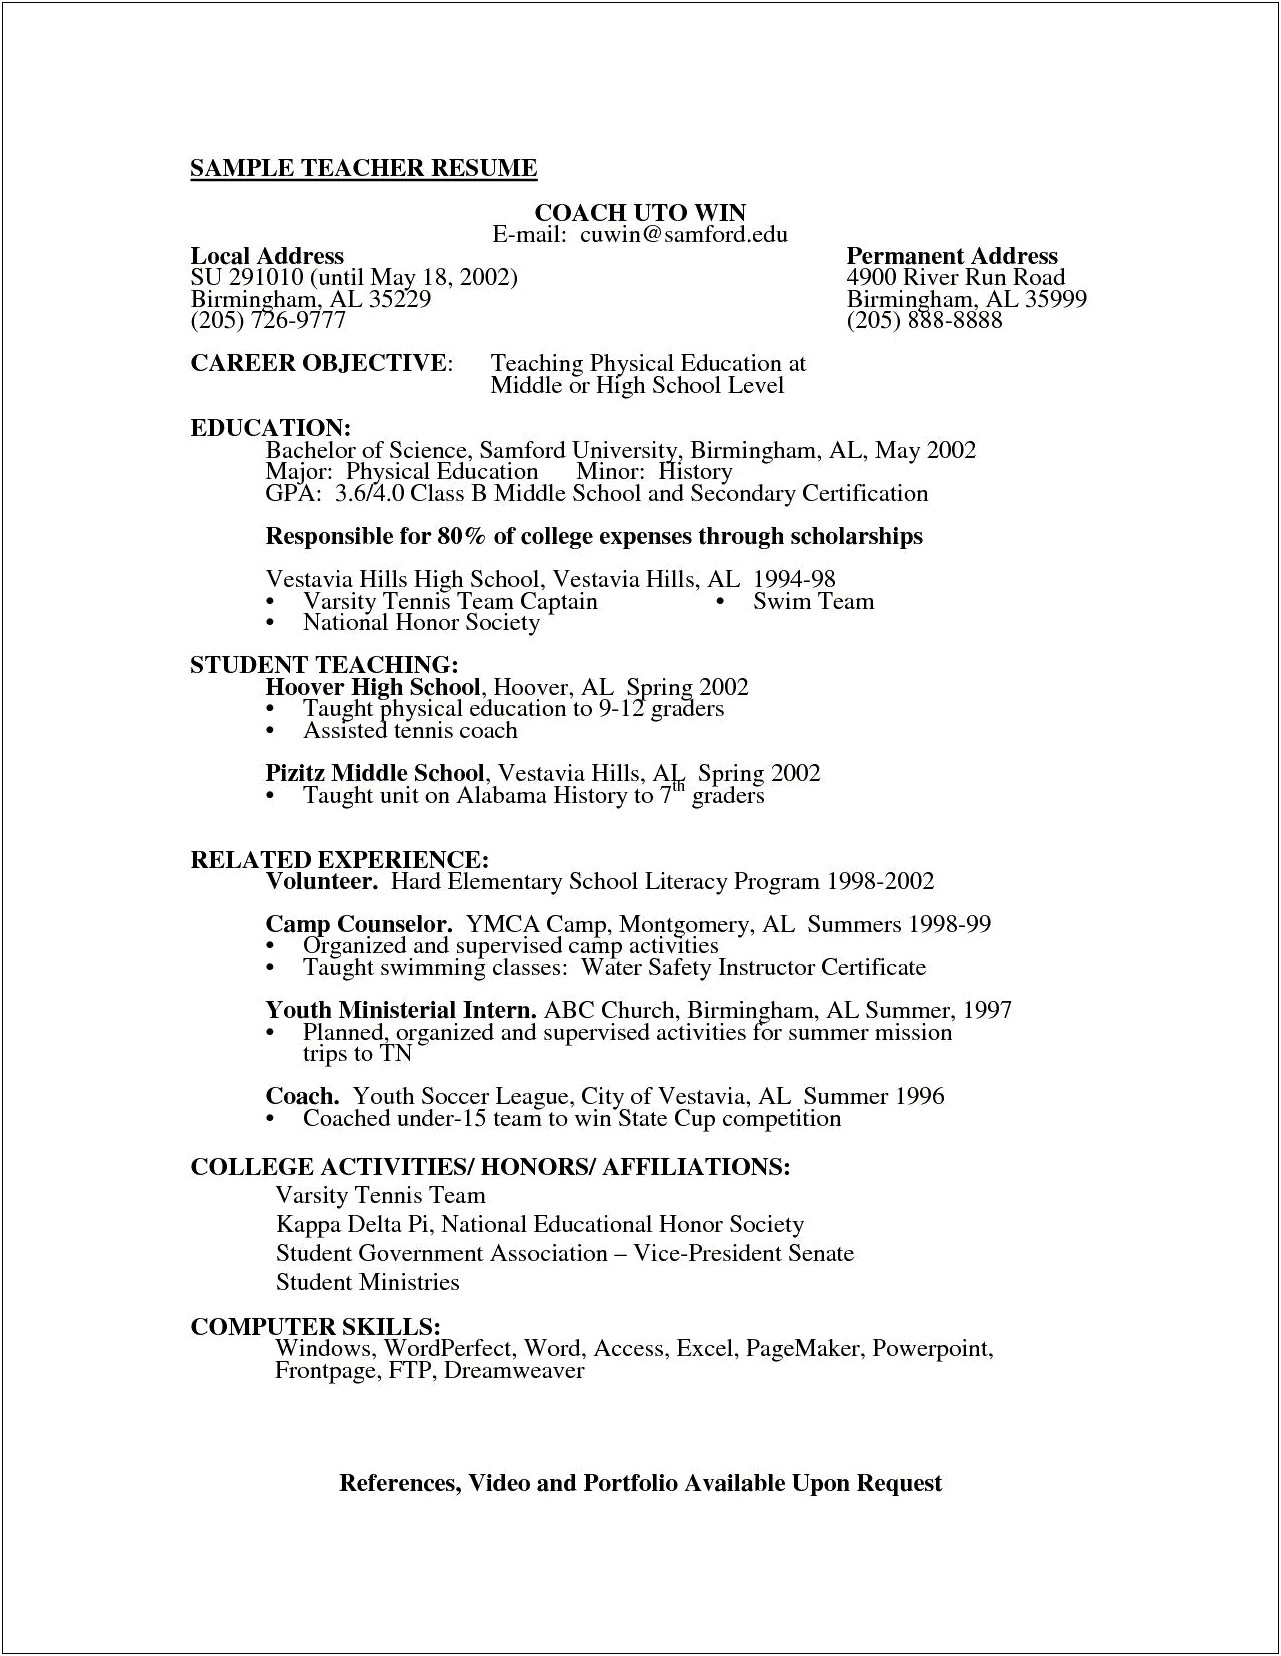 Resumes For High School Science Teachers